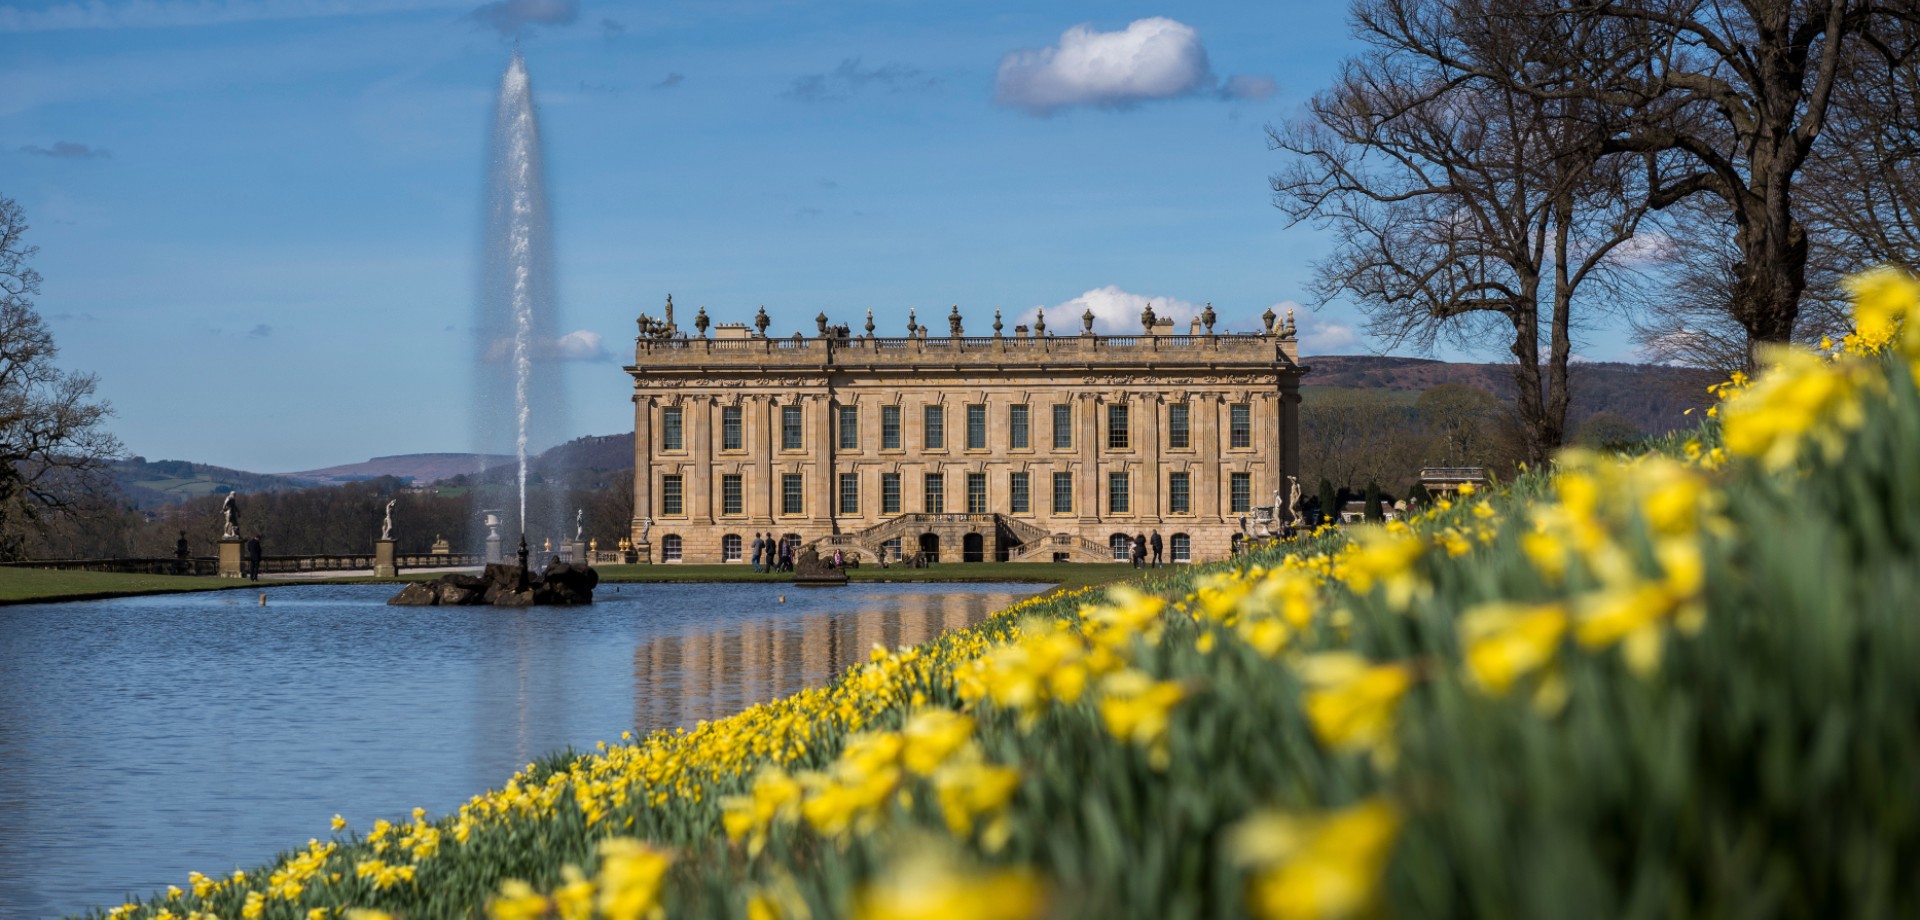 In the Chatsworth Garden: Springing to life